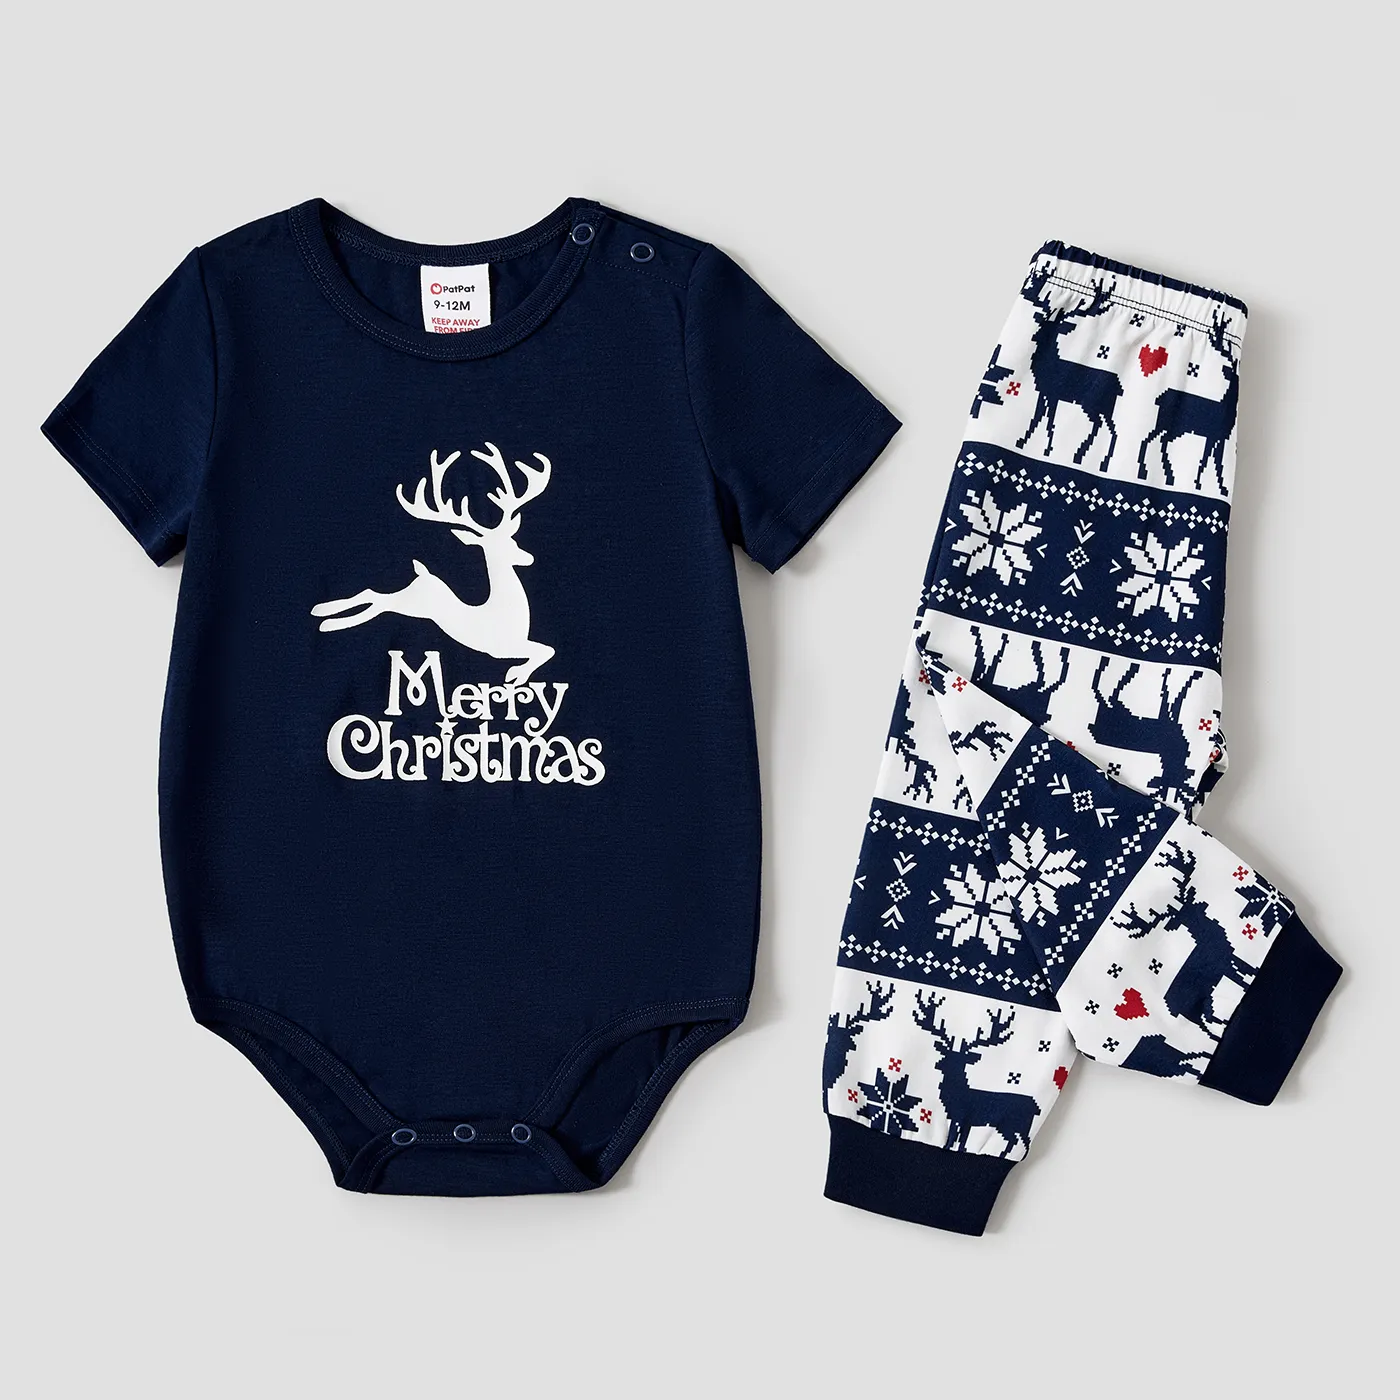 Christmas Reindeer Print Glow In The Dark Family Matching Pajamas Sets (Flame Resistant)